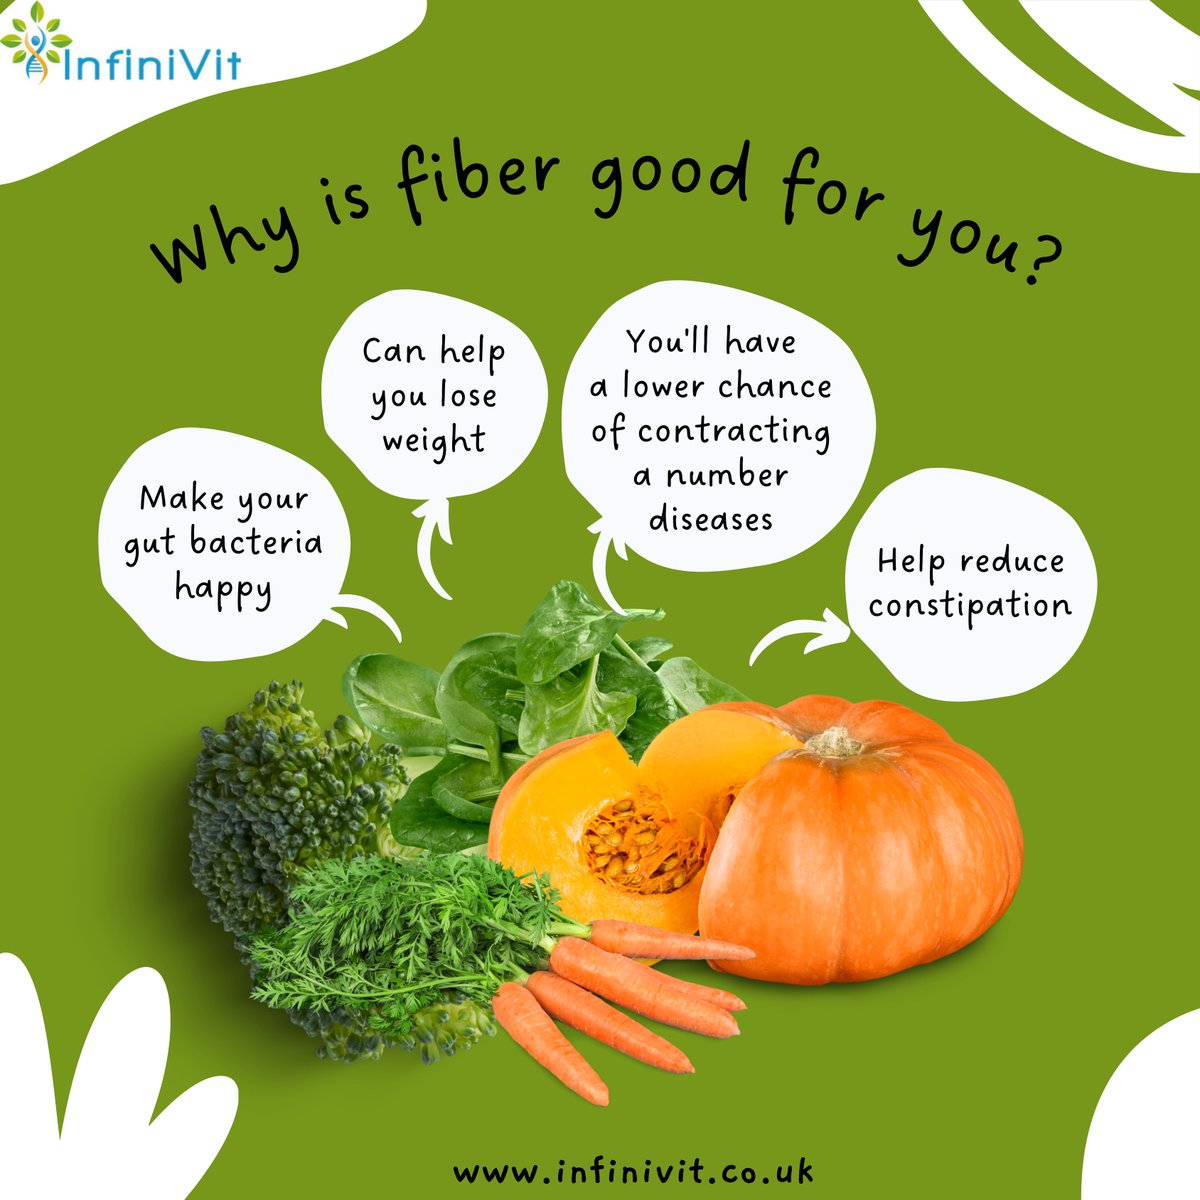 Why is fiber good for you?
.
.
Shop Now: infinivit.co.uk
Email: info@infinivit.co.uk
.
.
#FiberBenefits #FiberPower #HealthyLiving #FiberIsFantastic #HealthIsWealth